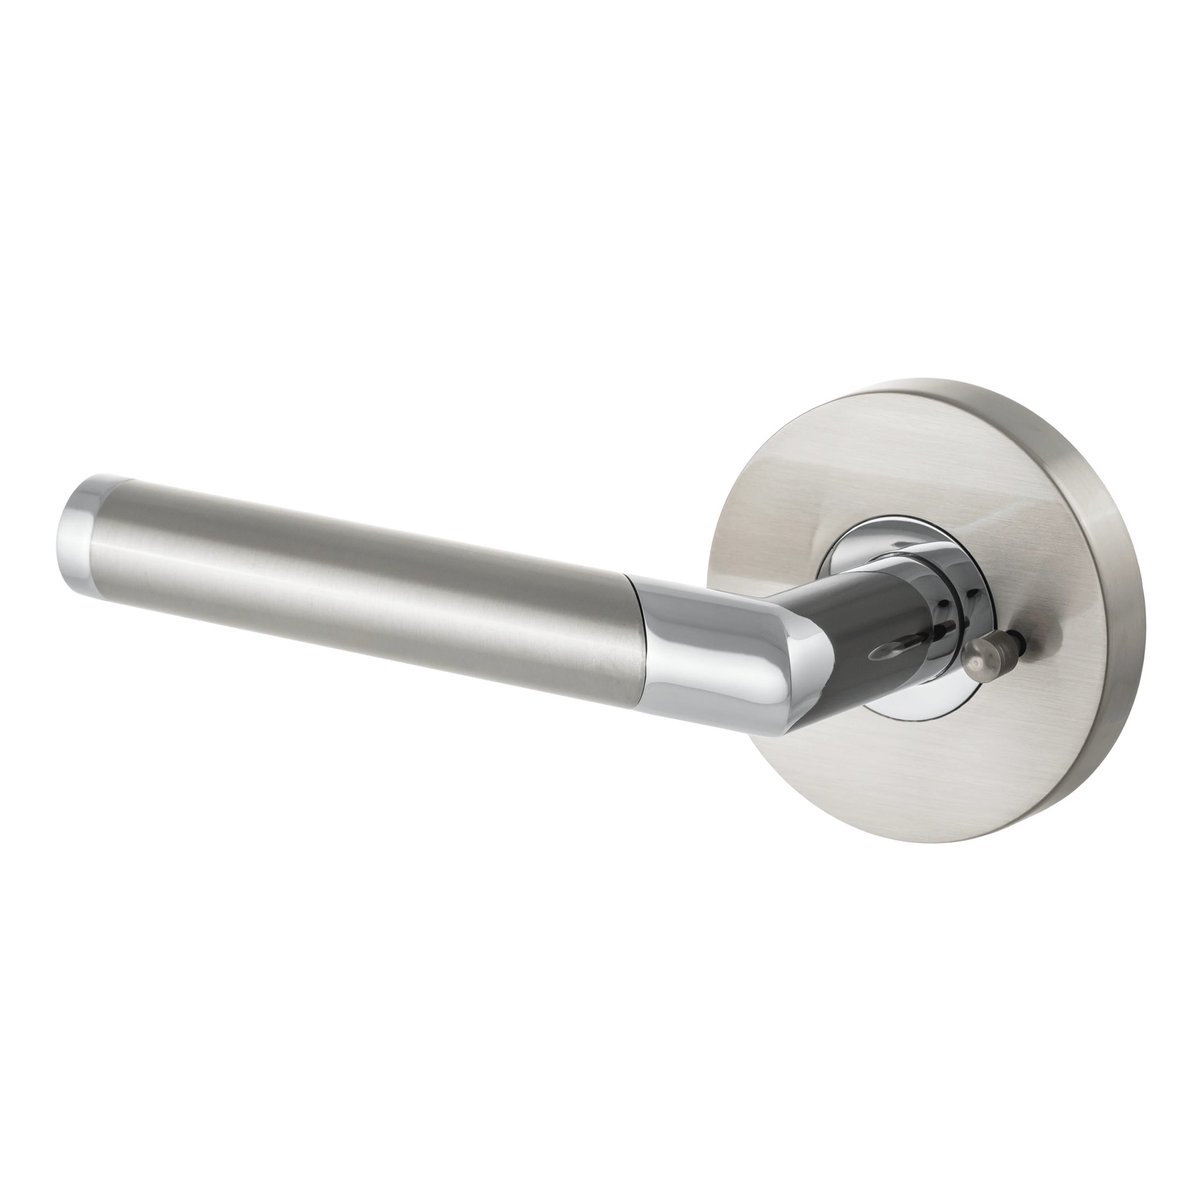 people who's house has doorknobs that are actually shaped like this